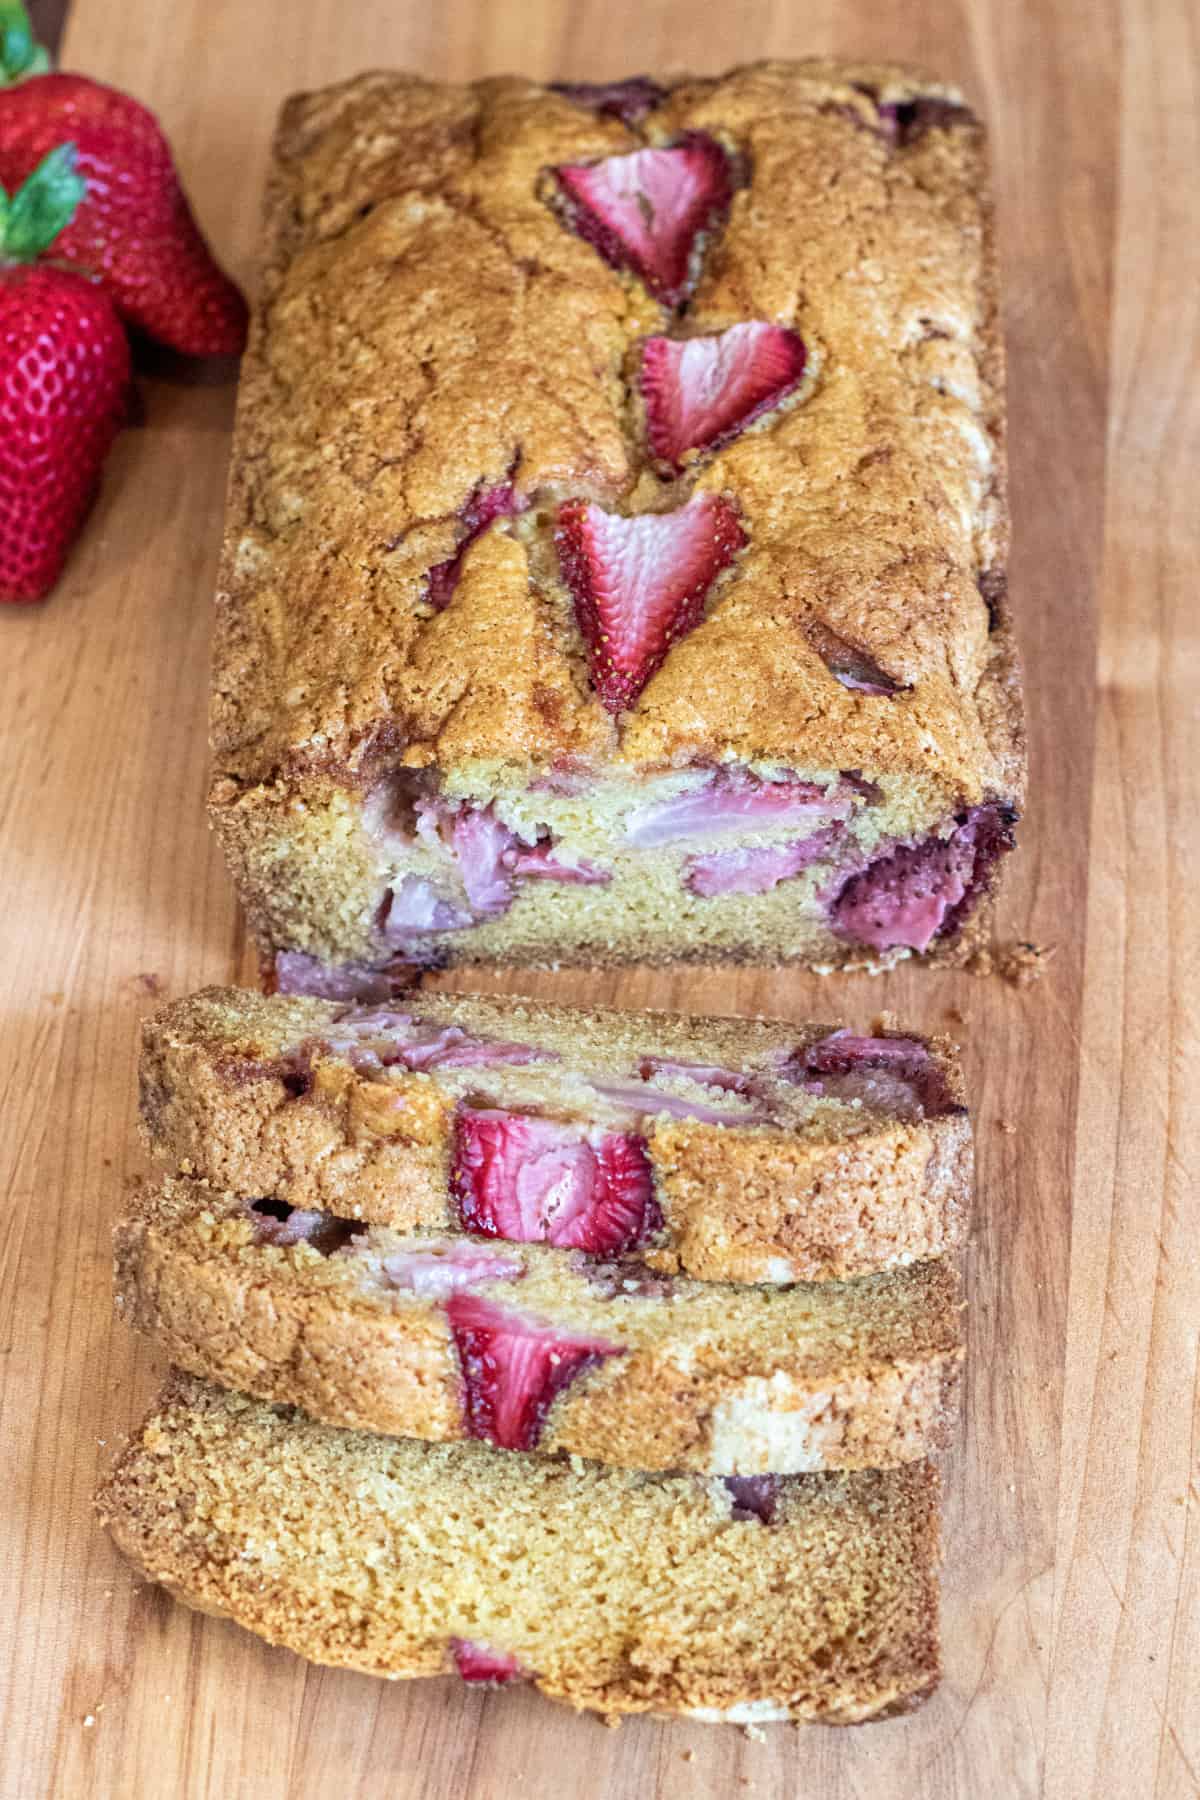 a loaf of bread with strawberries and slices.